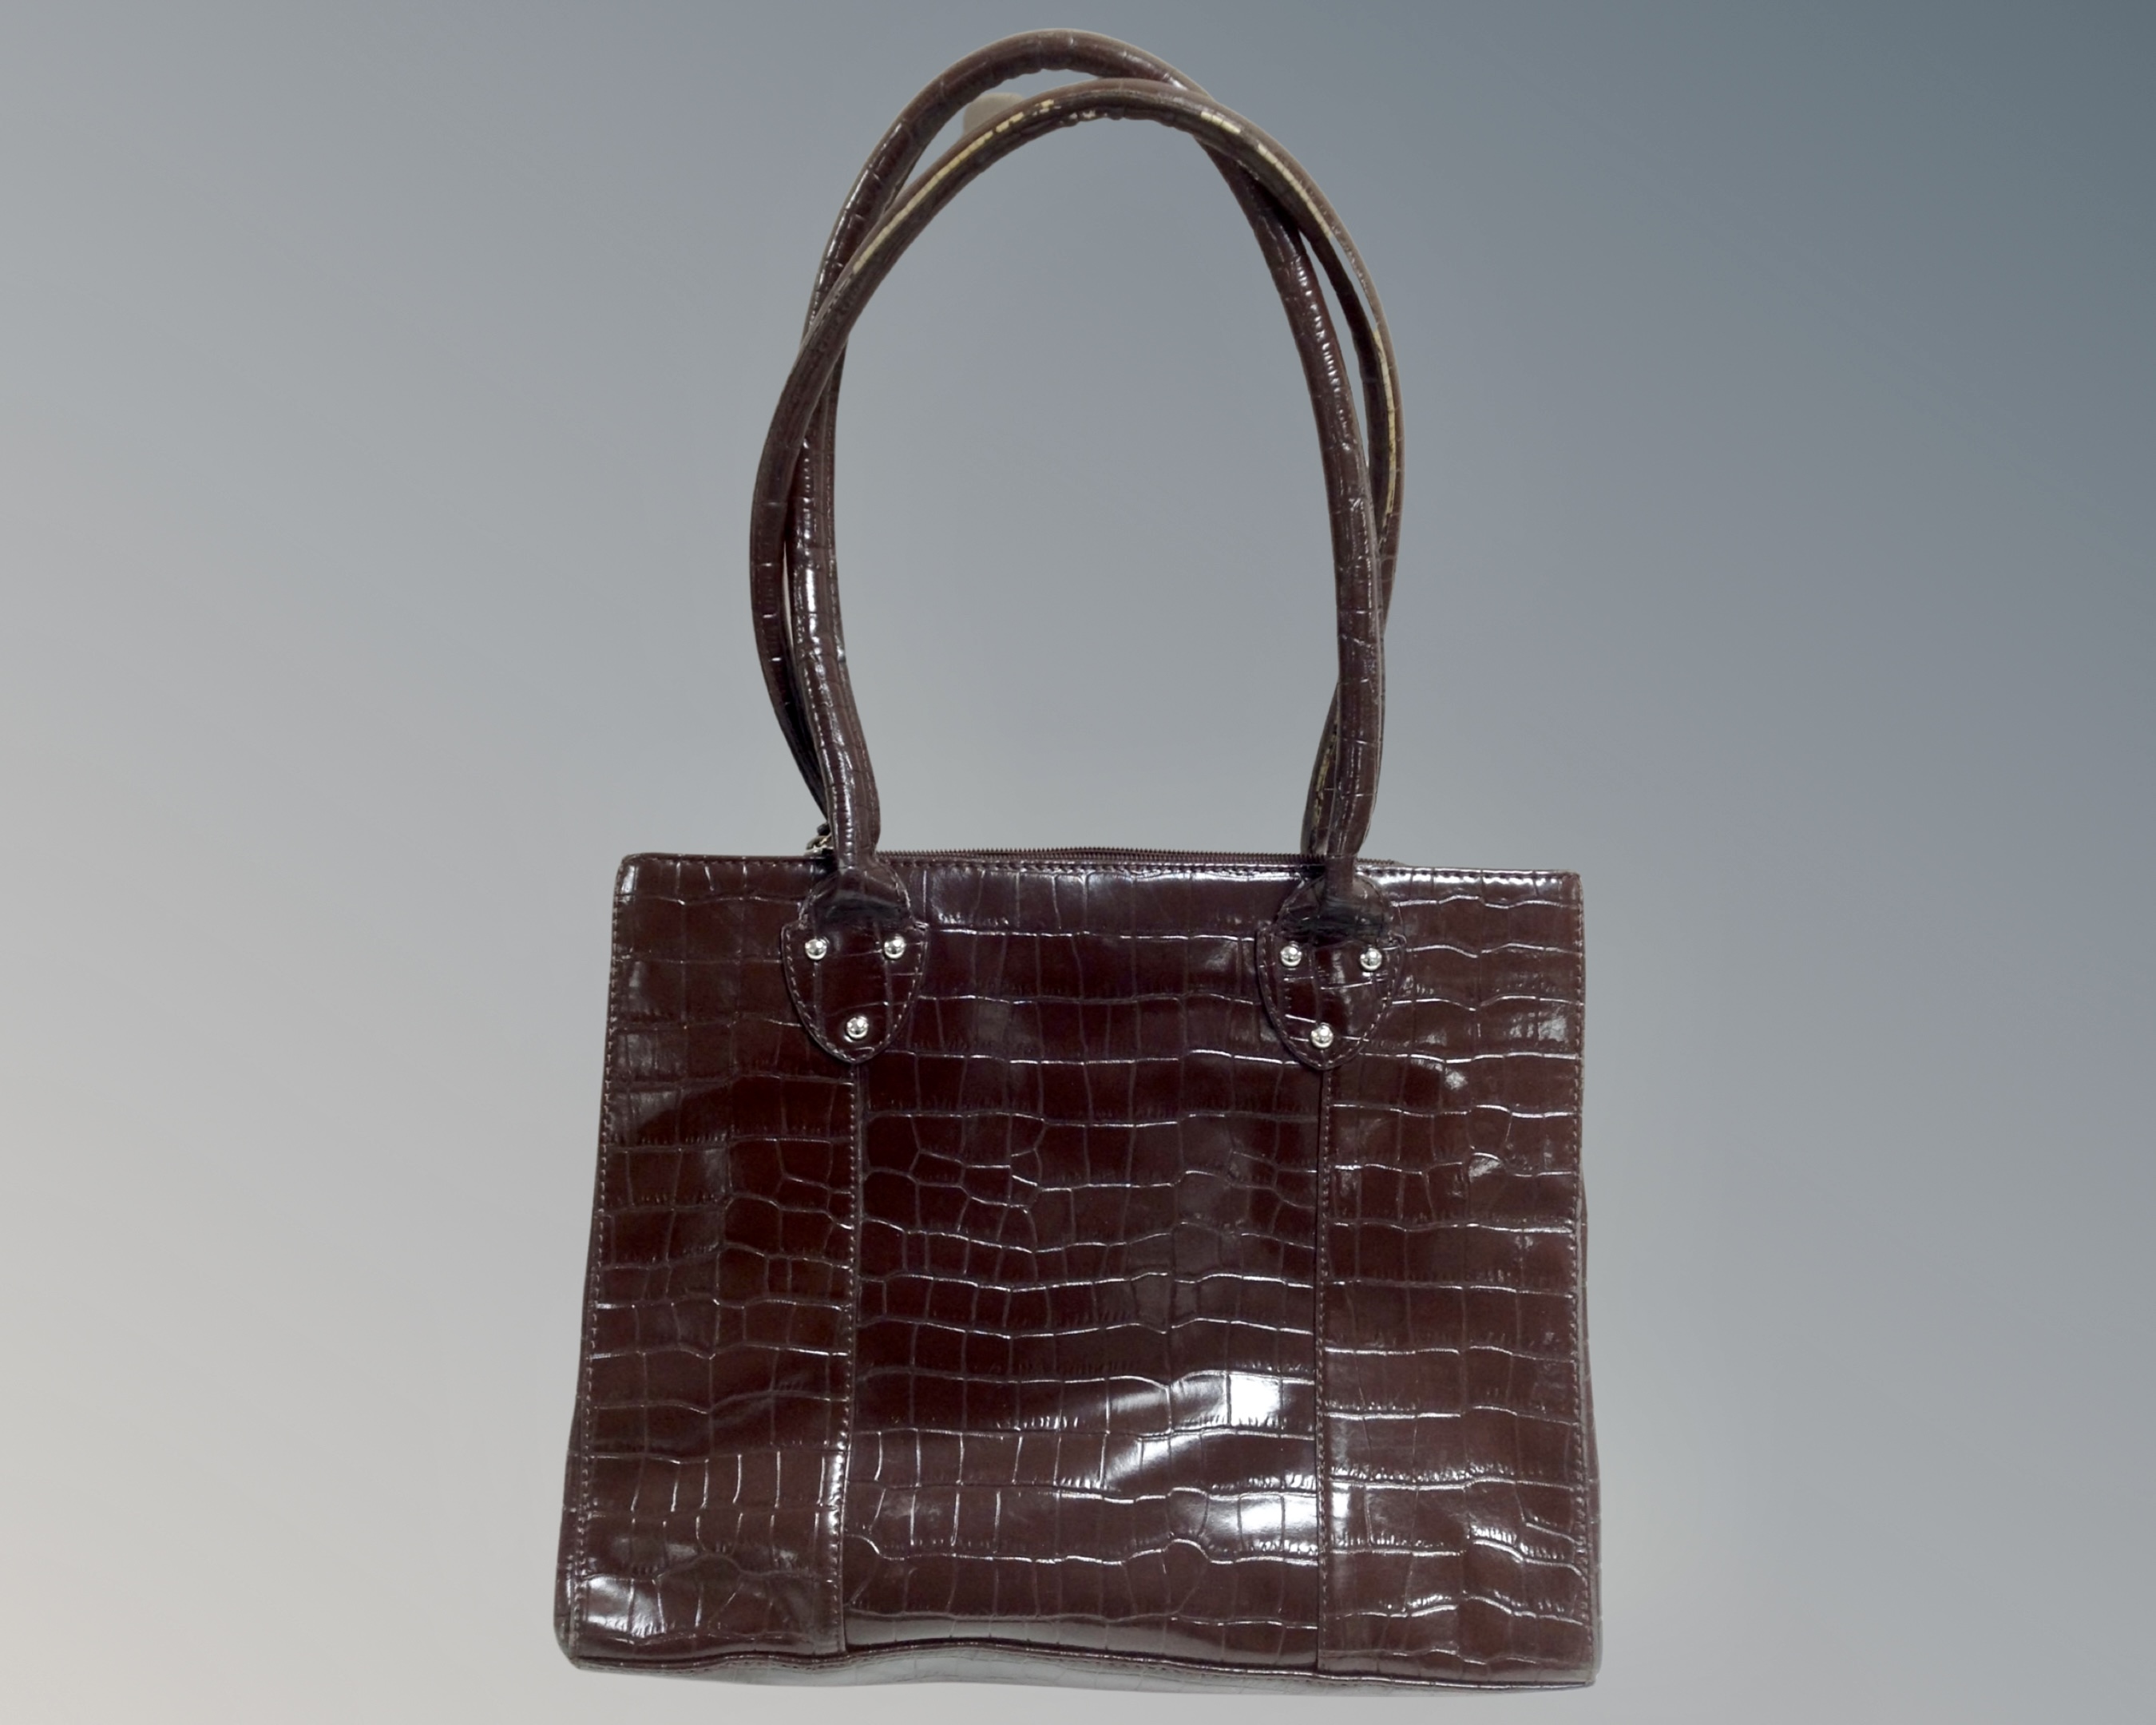 A lady's brown leather shoulder bag by Osprey London - Image 2 of 2